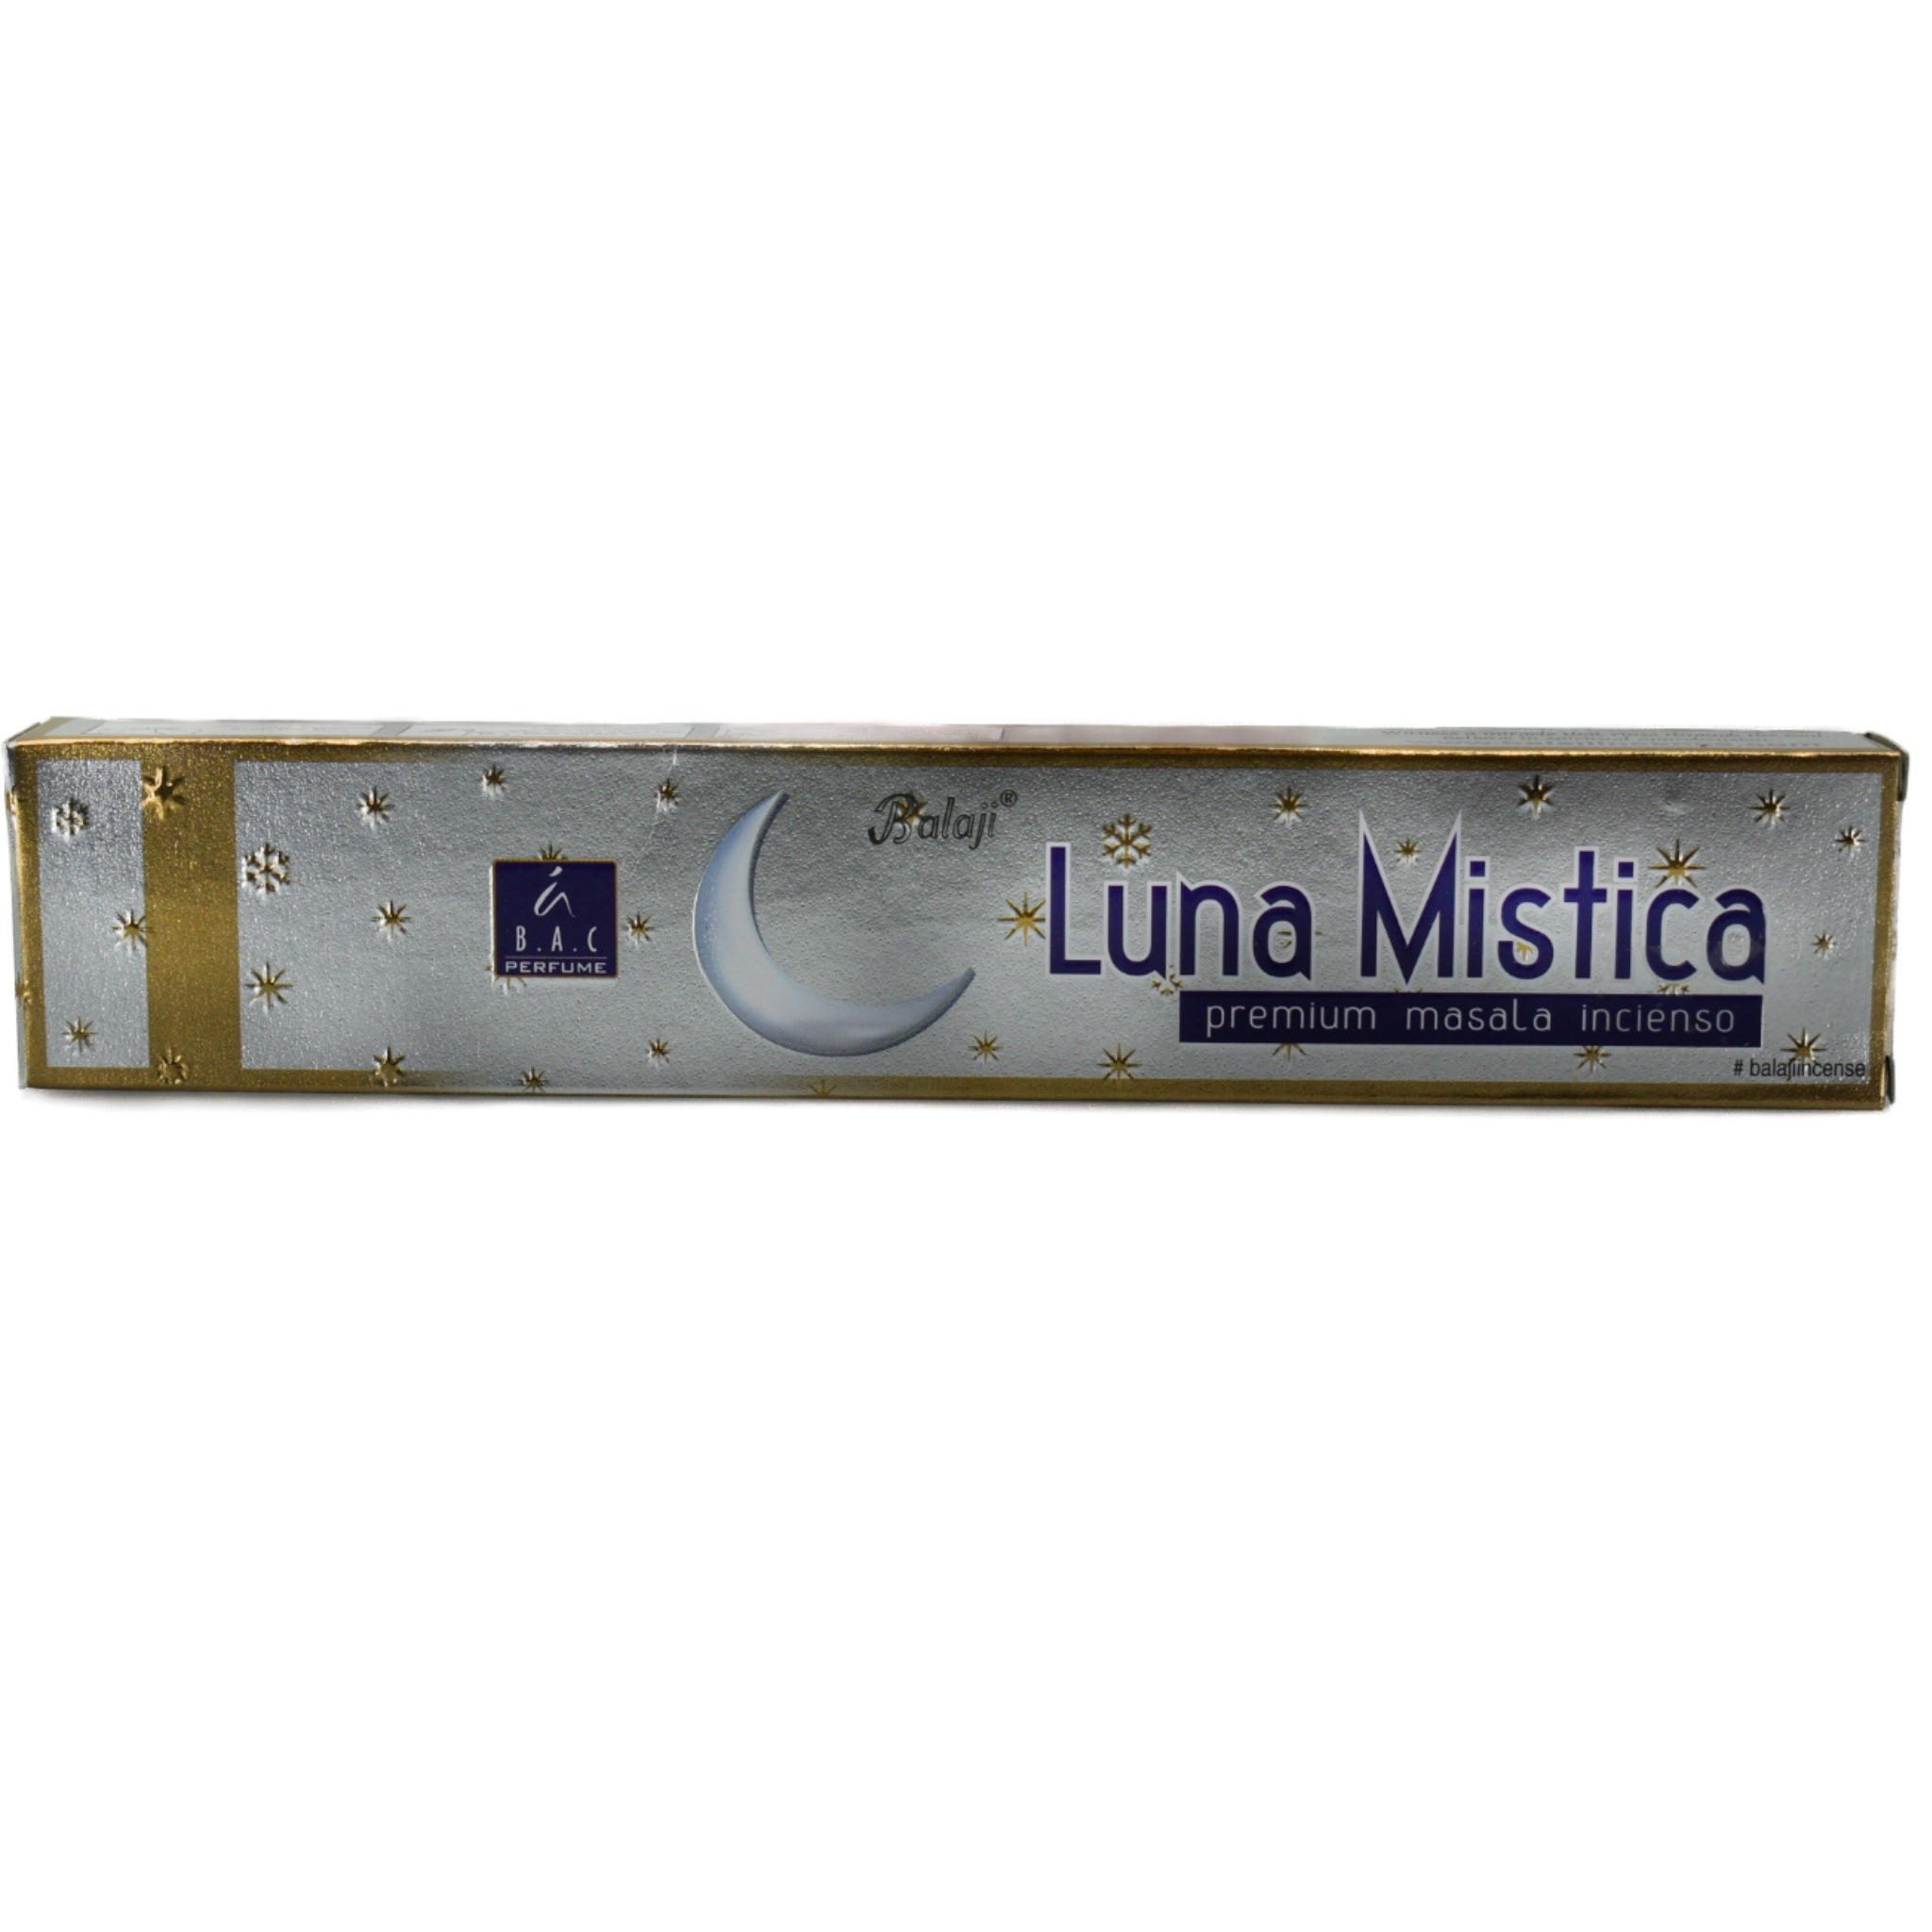 Mystic Moon Incense Sticks back.  The back cover is a duplicate of the front cover with a difference.  The title says Luna Mistica premium masala incienso.